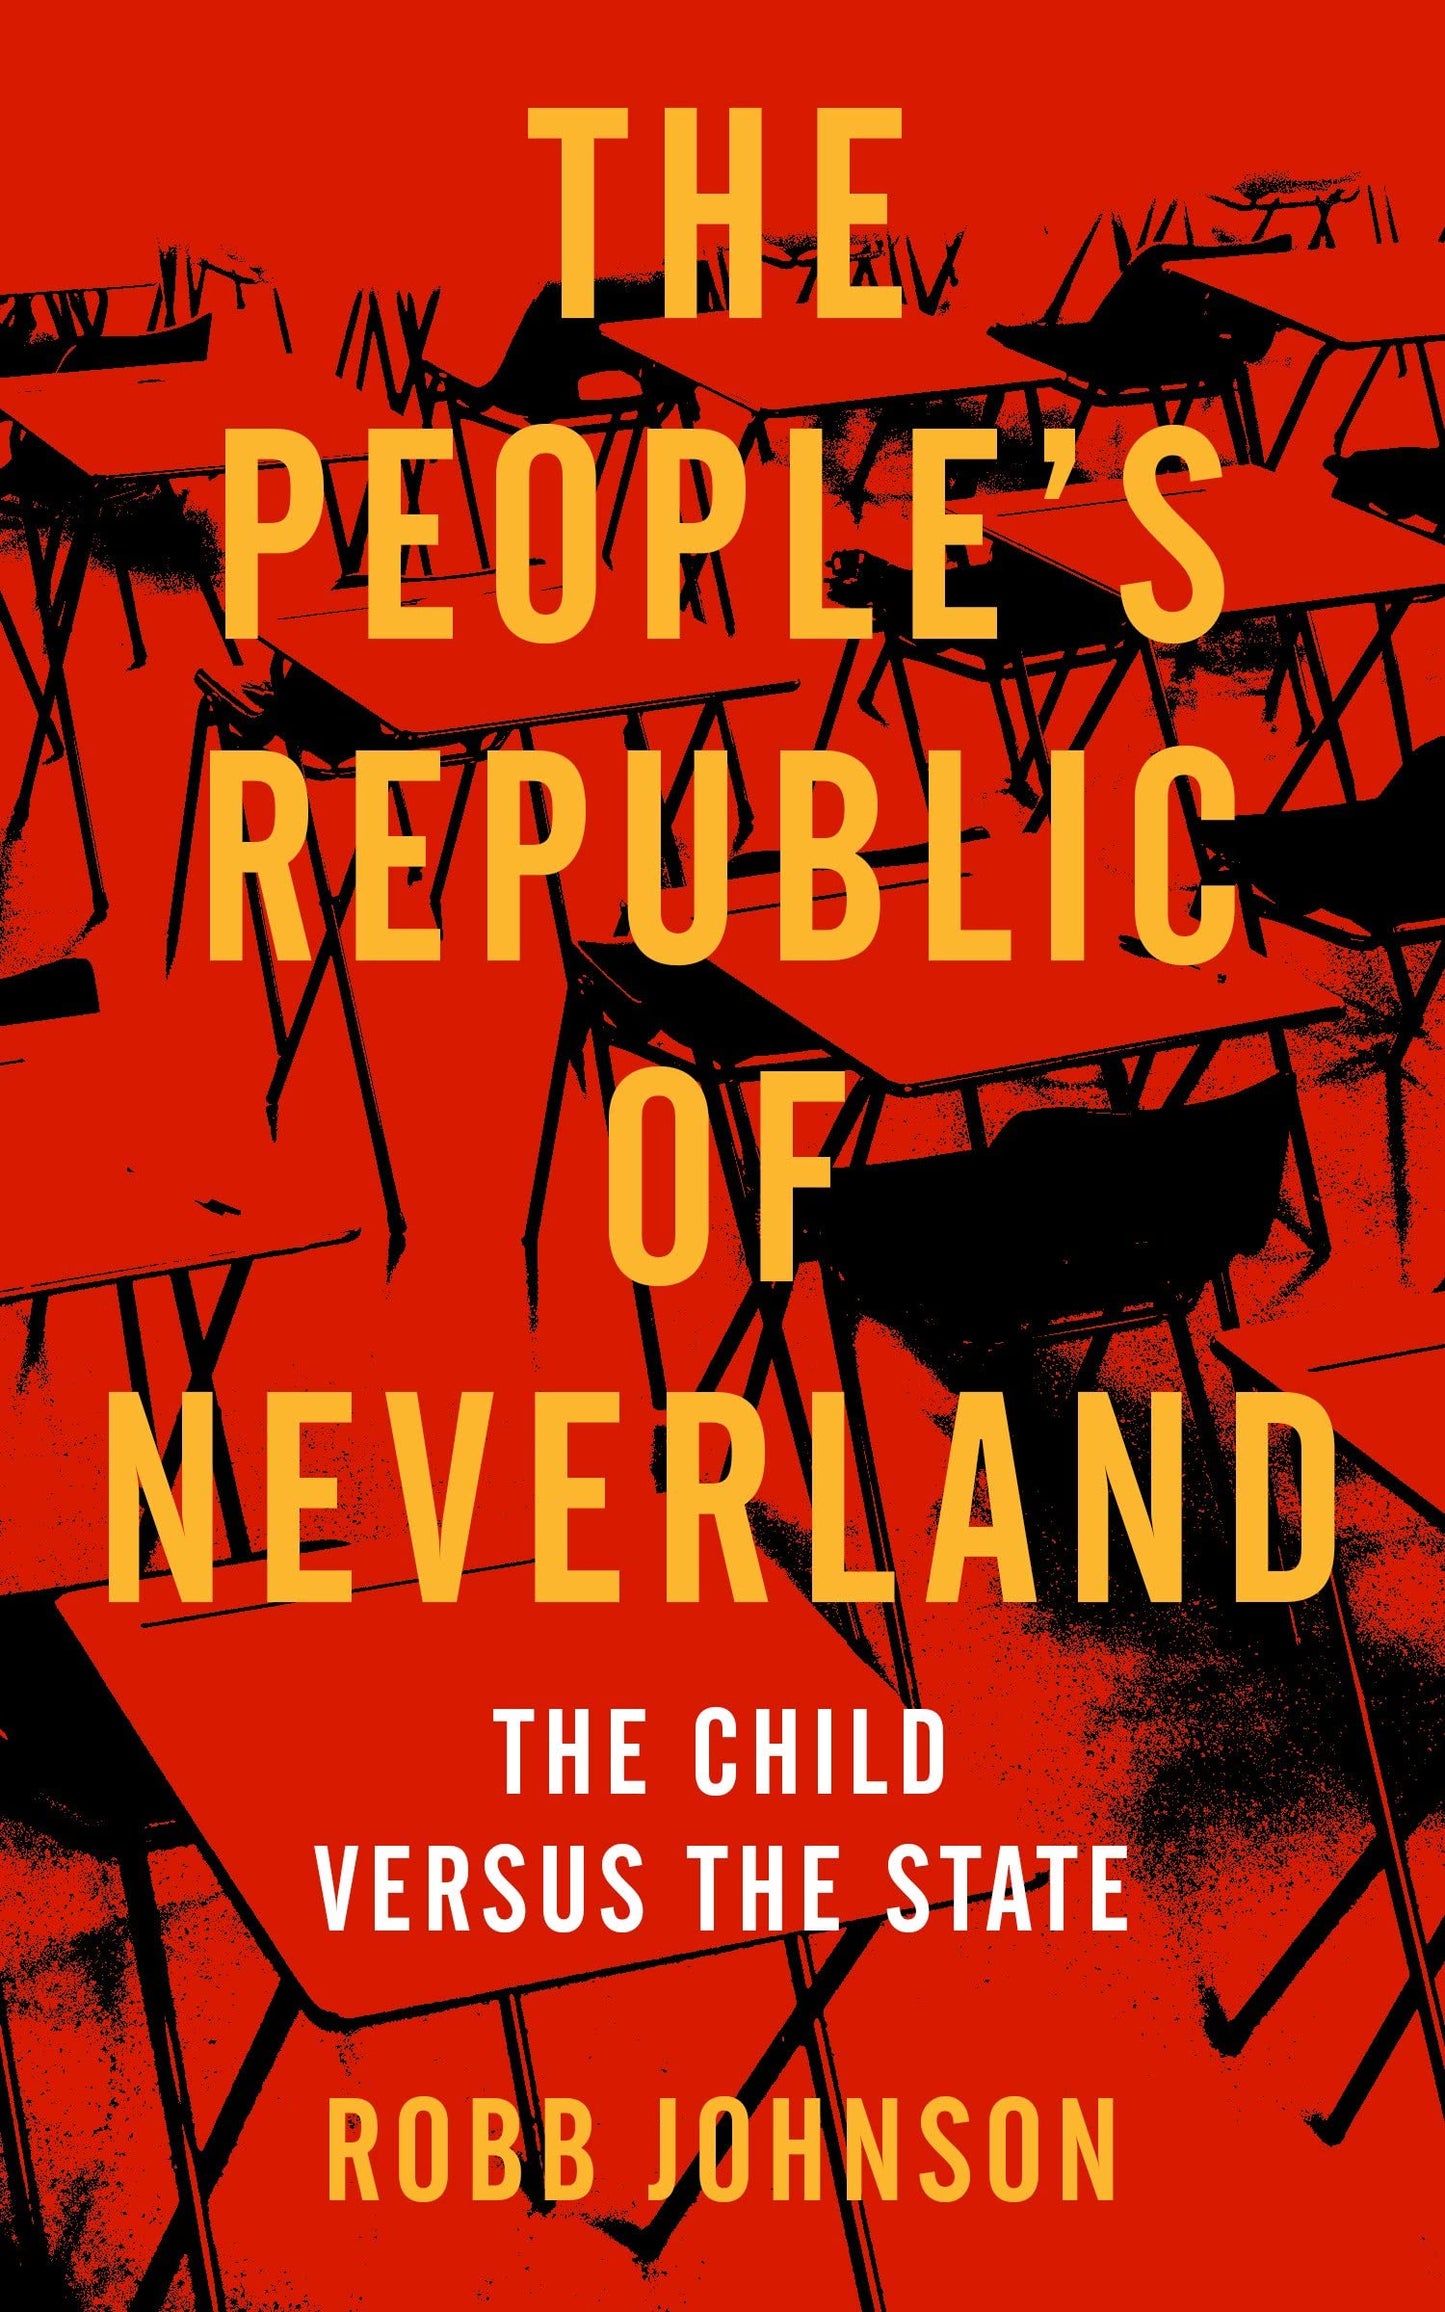 The People’s Republic of Neverland, by Robb Johnson